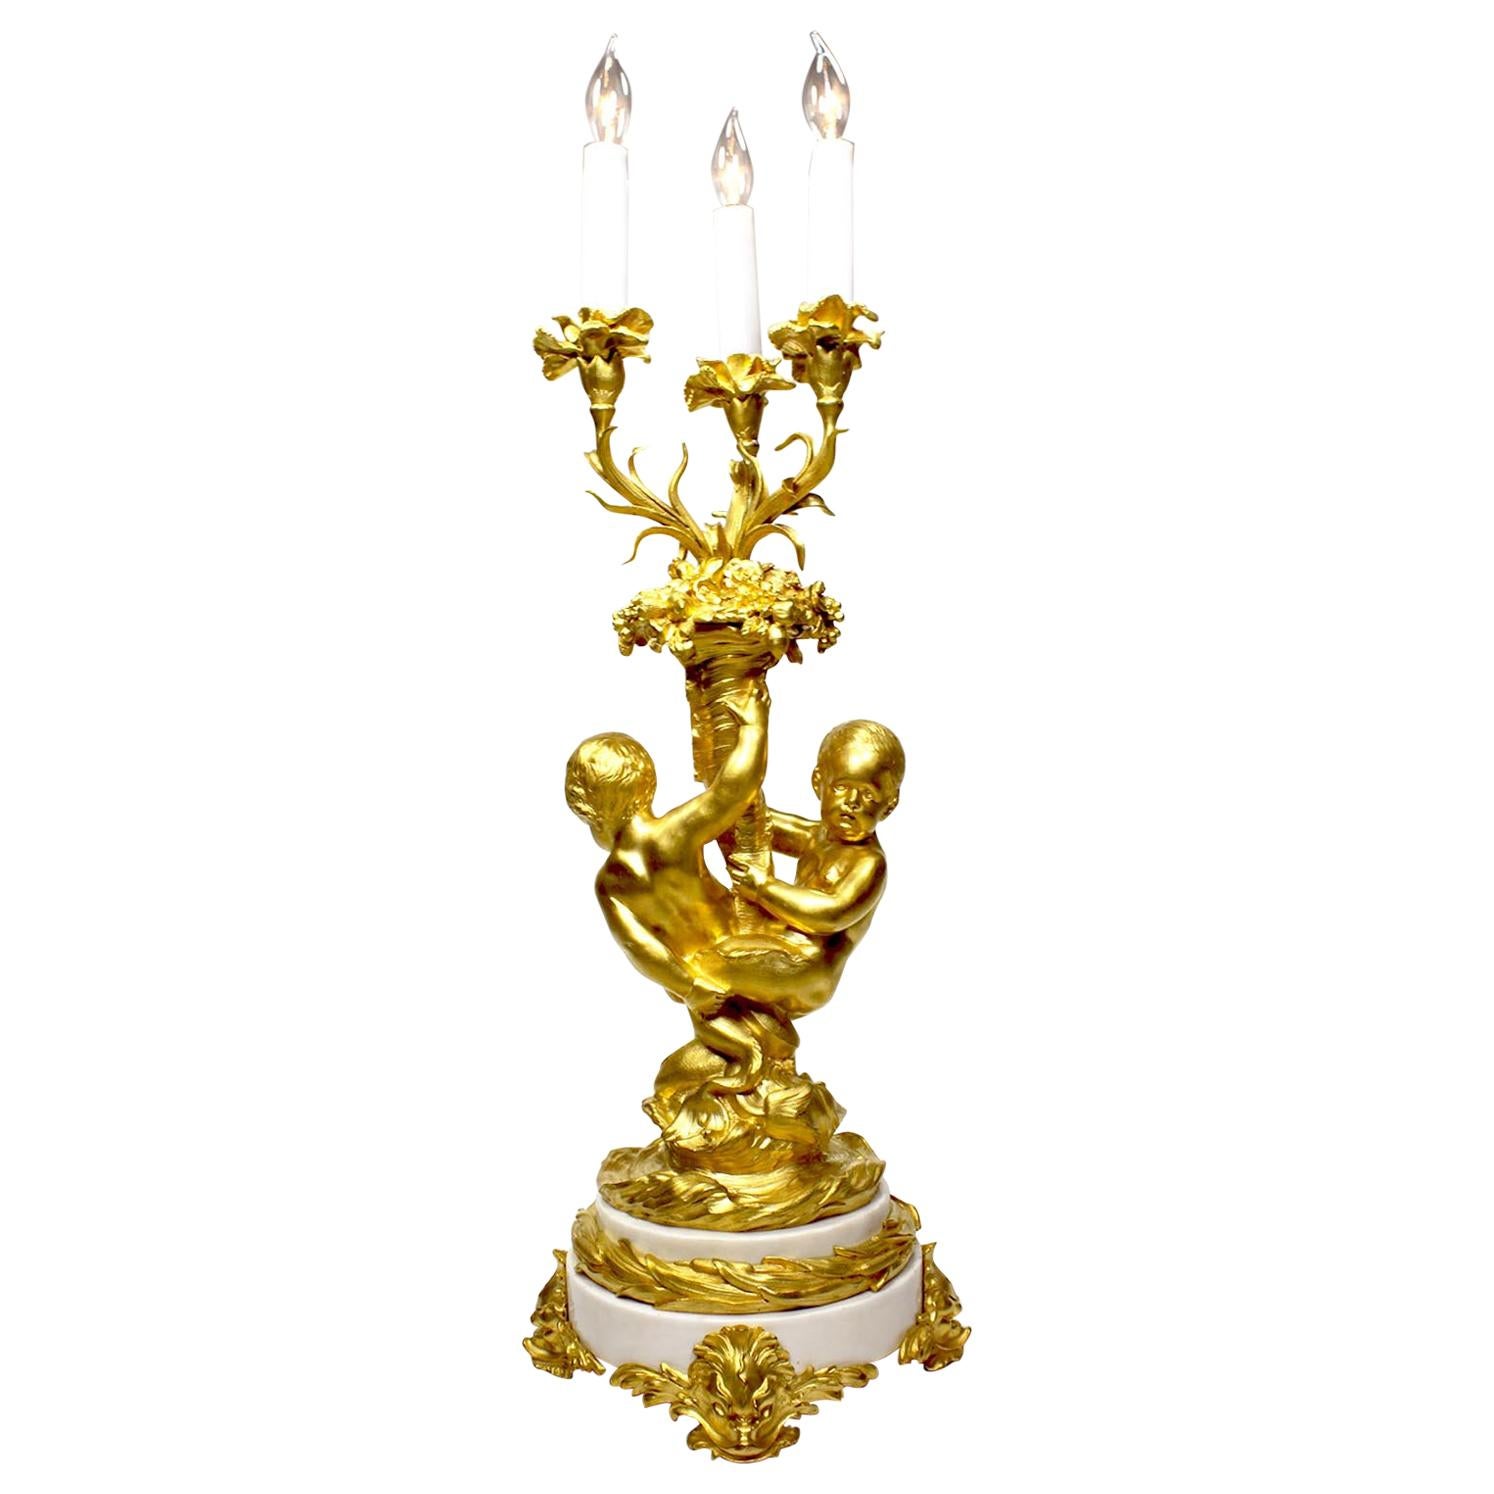 French 19th-20th Century Louis XV Style Ormolu & White Marble Mermaid Candelabra For Sale